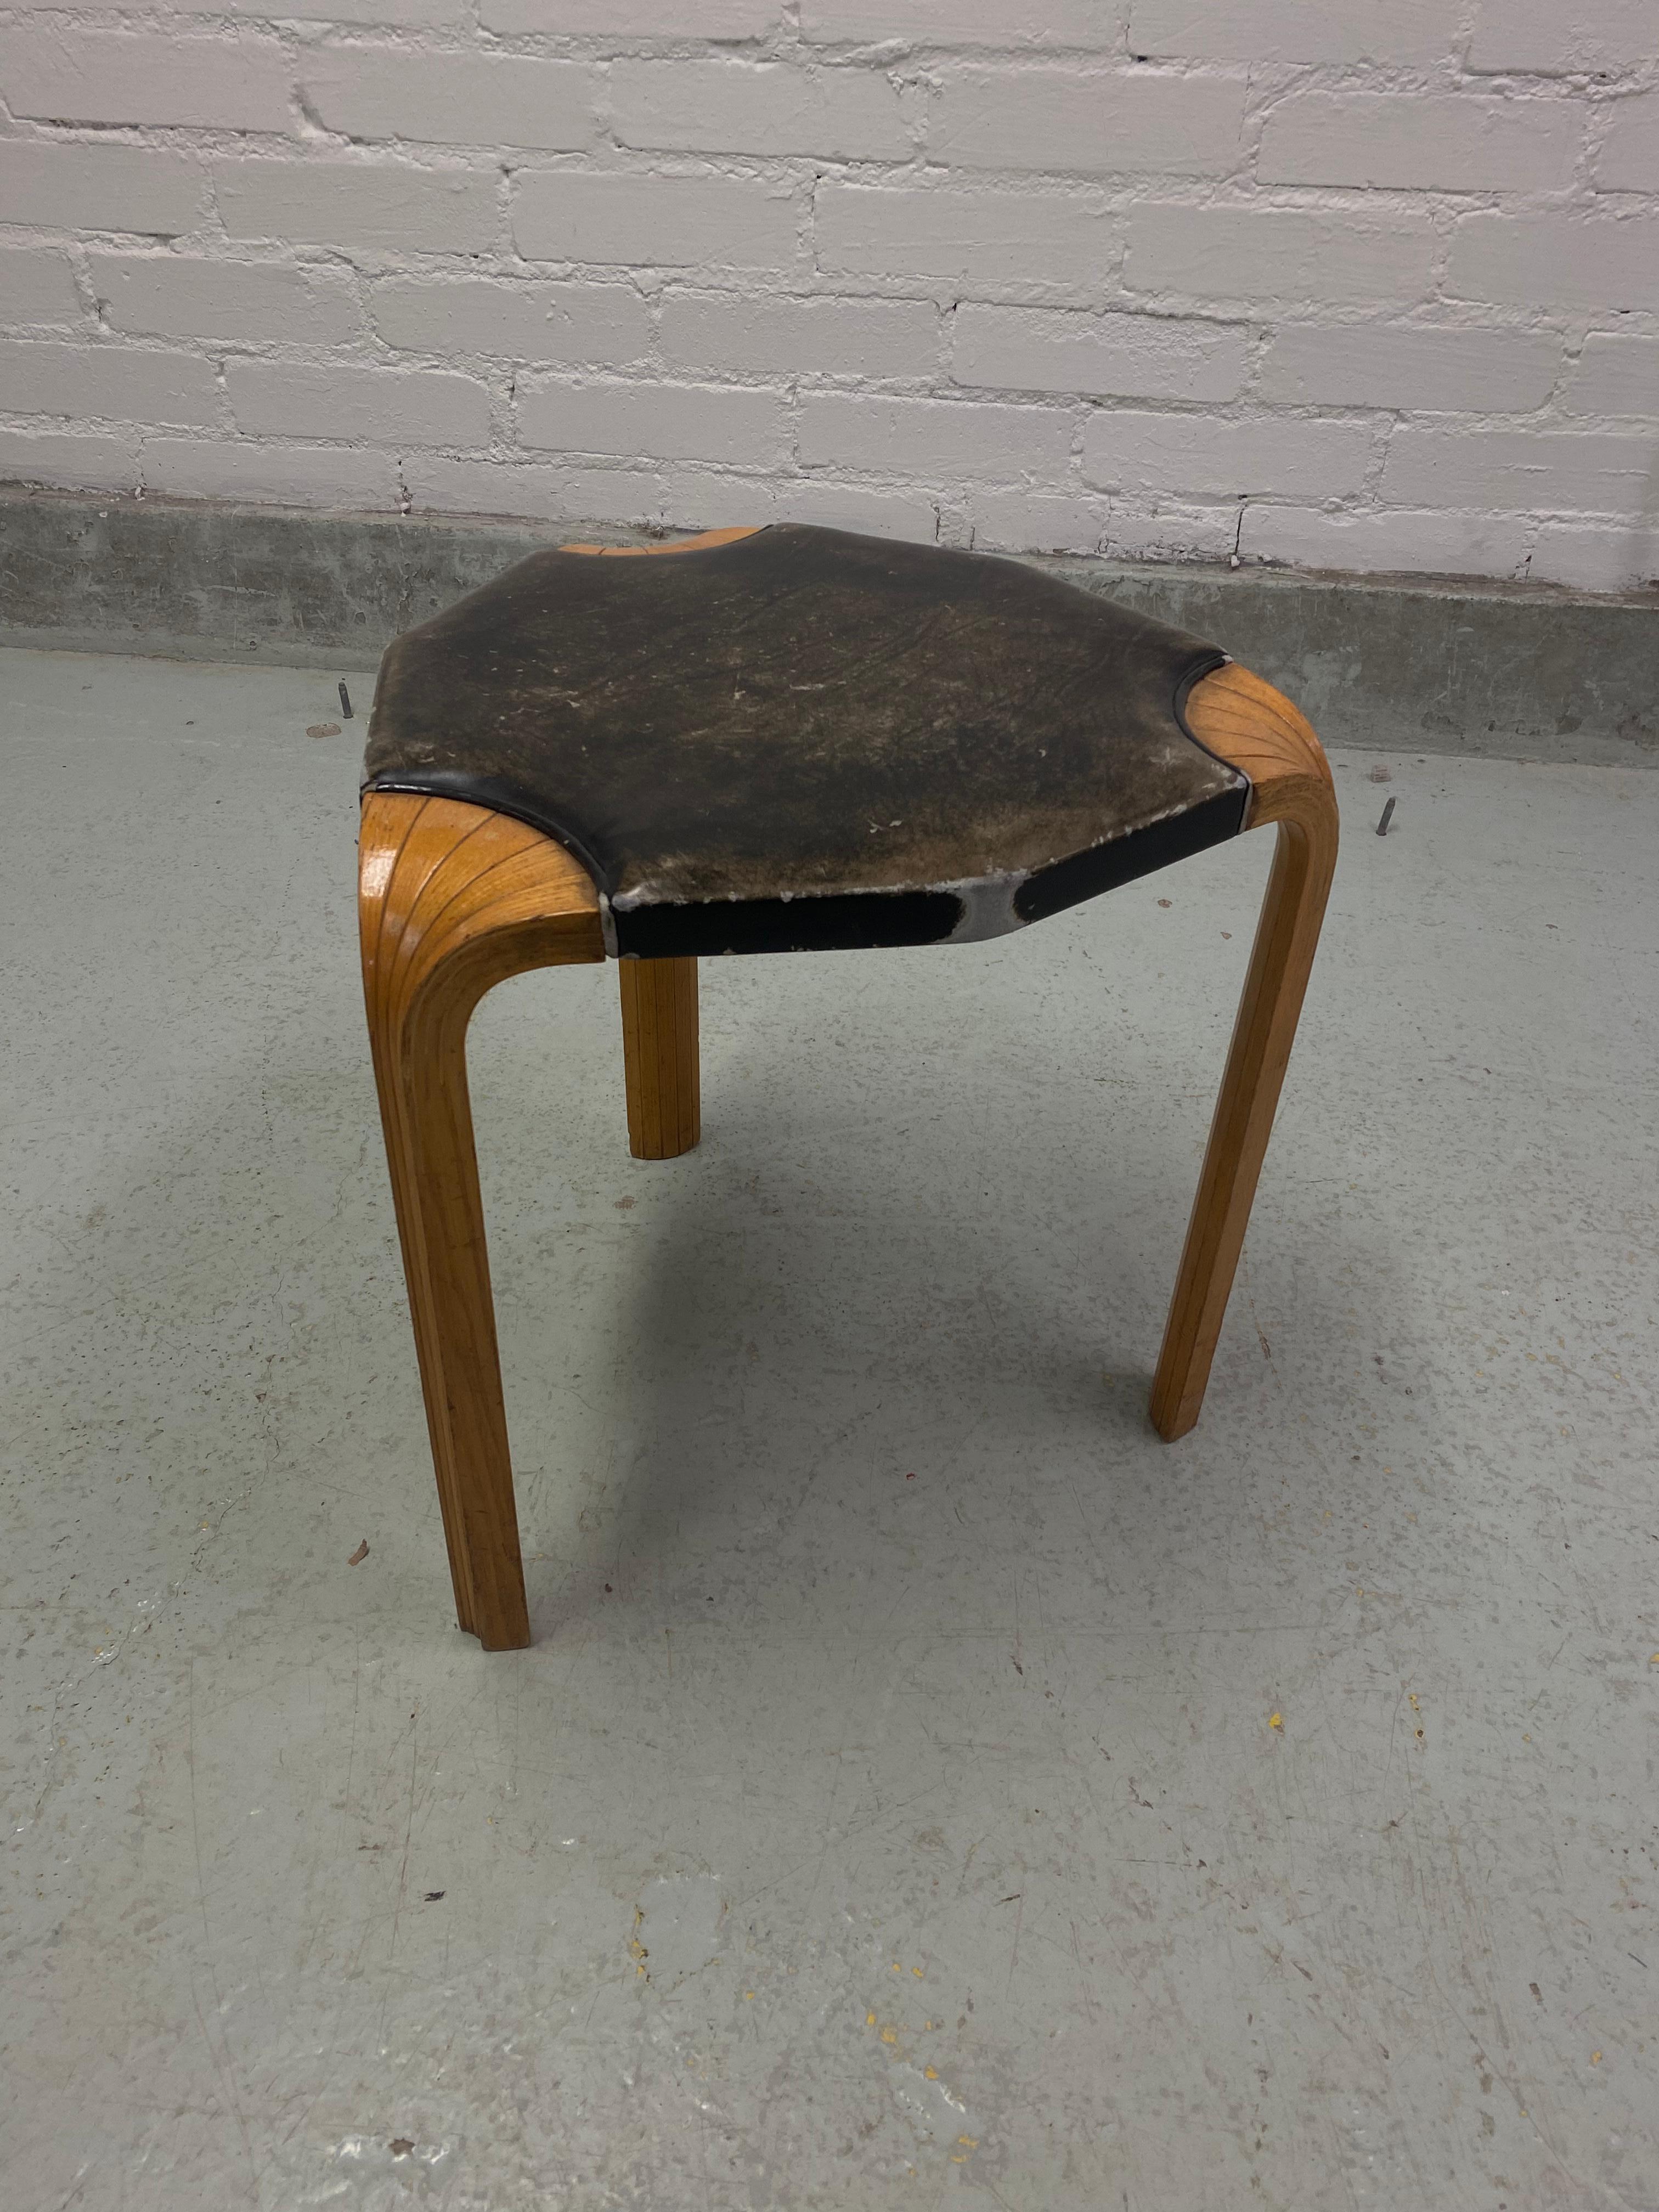 Alvar Aalto stool model X602, manufactured in Finland by Oy Huonekalu-ja Rakennustyötehdas Ab back in the 1950s. 

A rare model, the X-leg stool is one of the simplest yet most brilliant designs by Alvar Aalto. Honey colored patinated bentwood legs